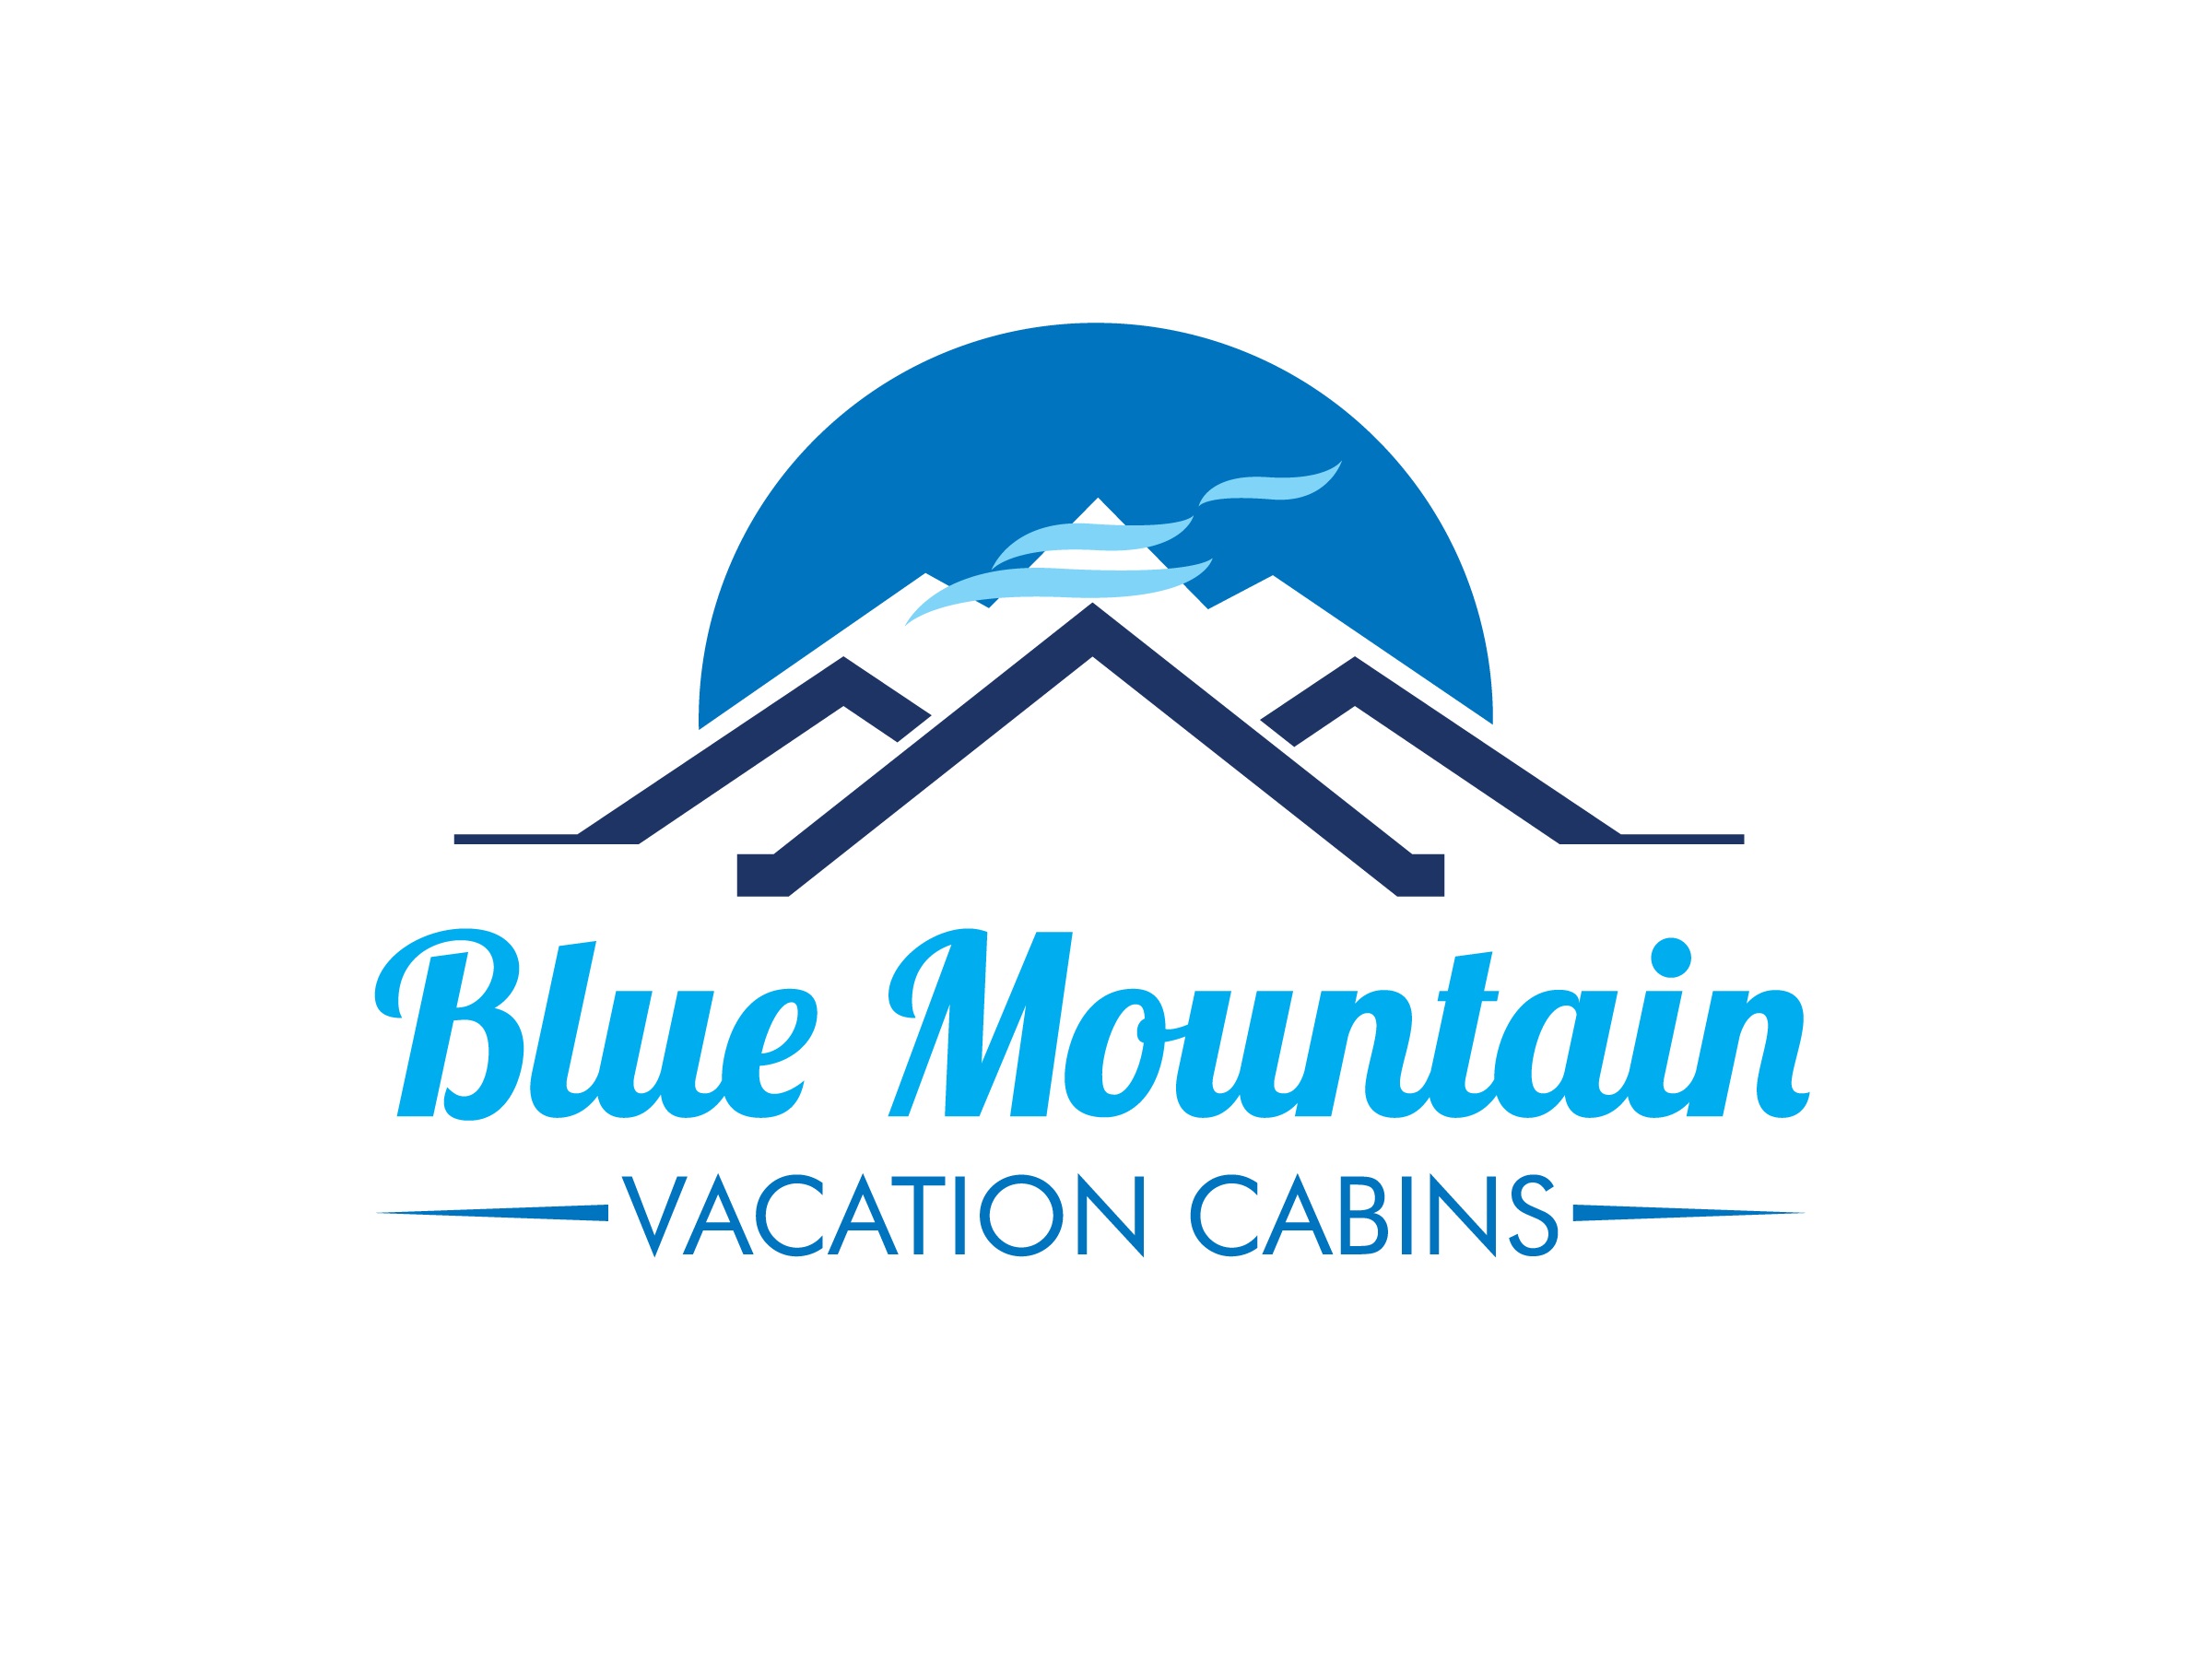 Blue Mountain Vacation Cabins